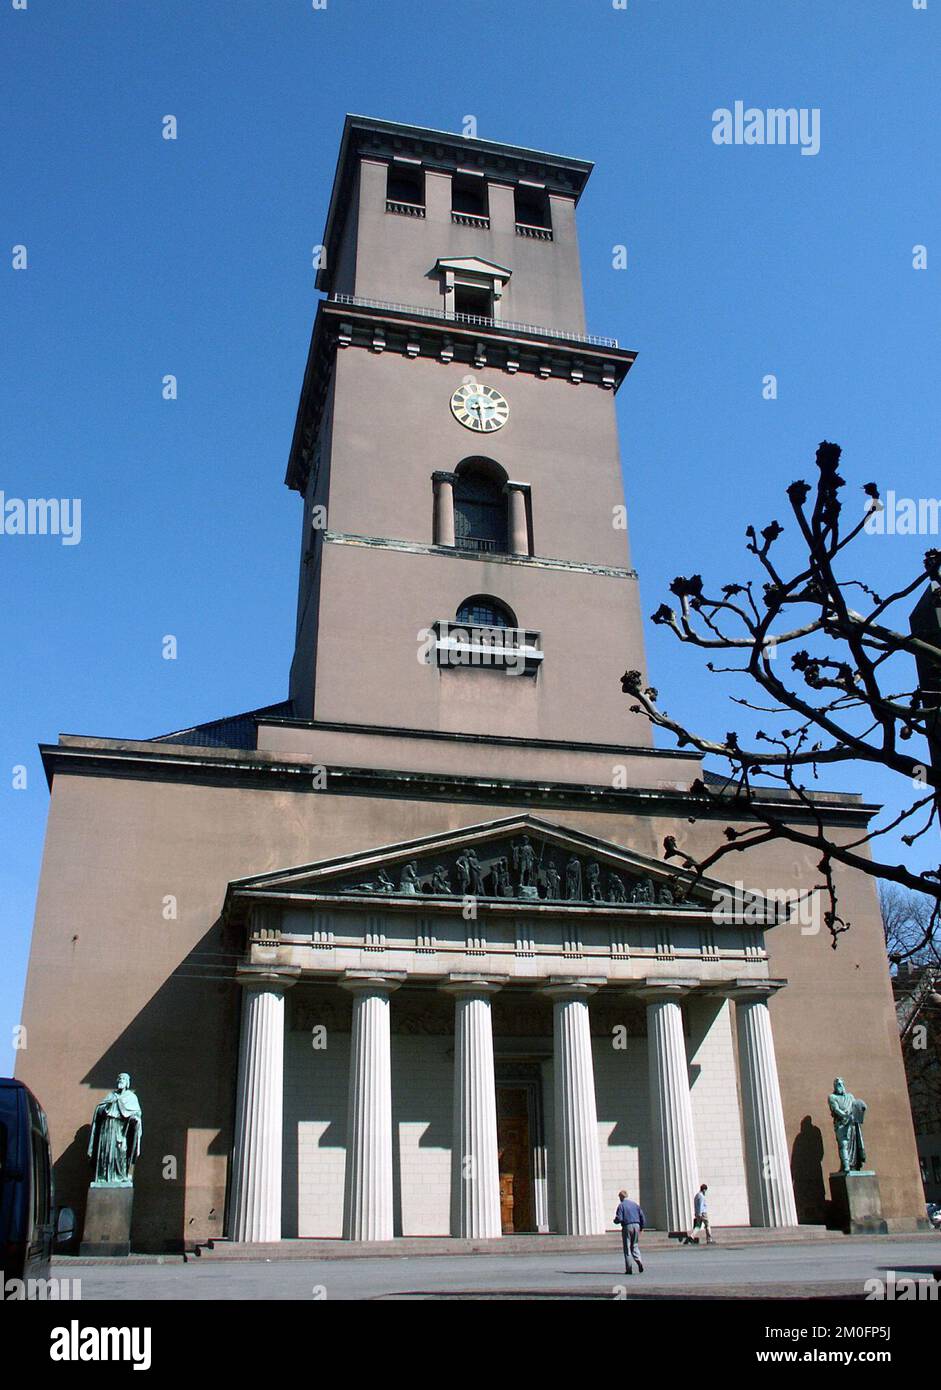 HRH Crown Prince Frederik and Miss Mary Donaldson will be married in the Cathedral of Copenhagen, Our Lady's Church. The wedding will take place on Friday 14 May 2004. Stock Photo